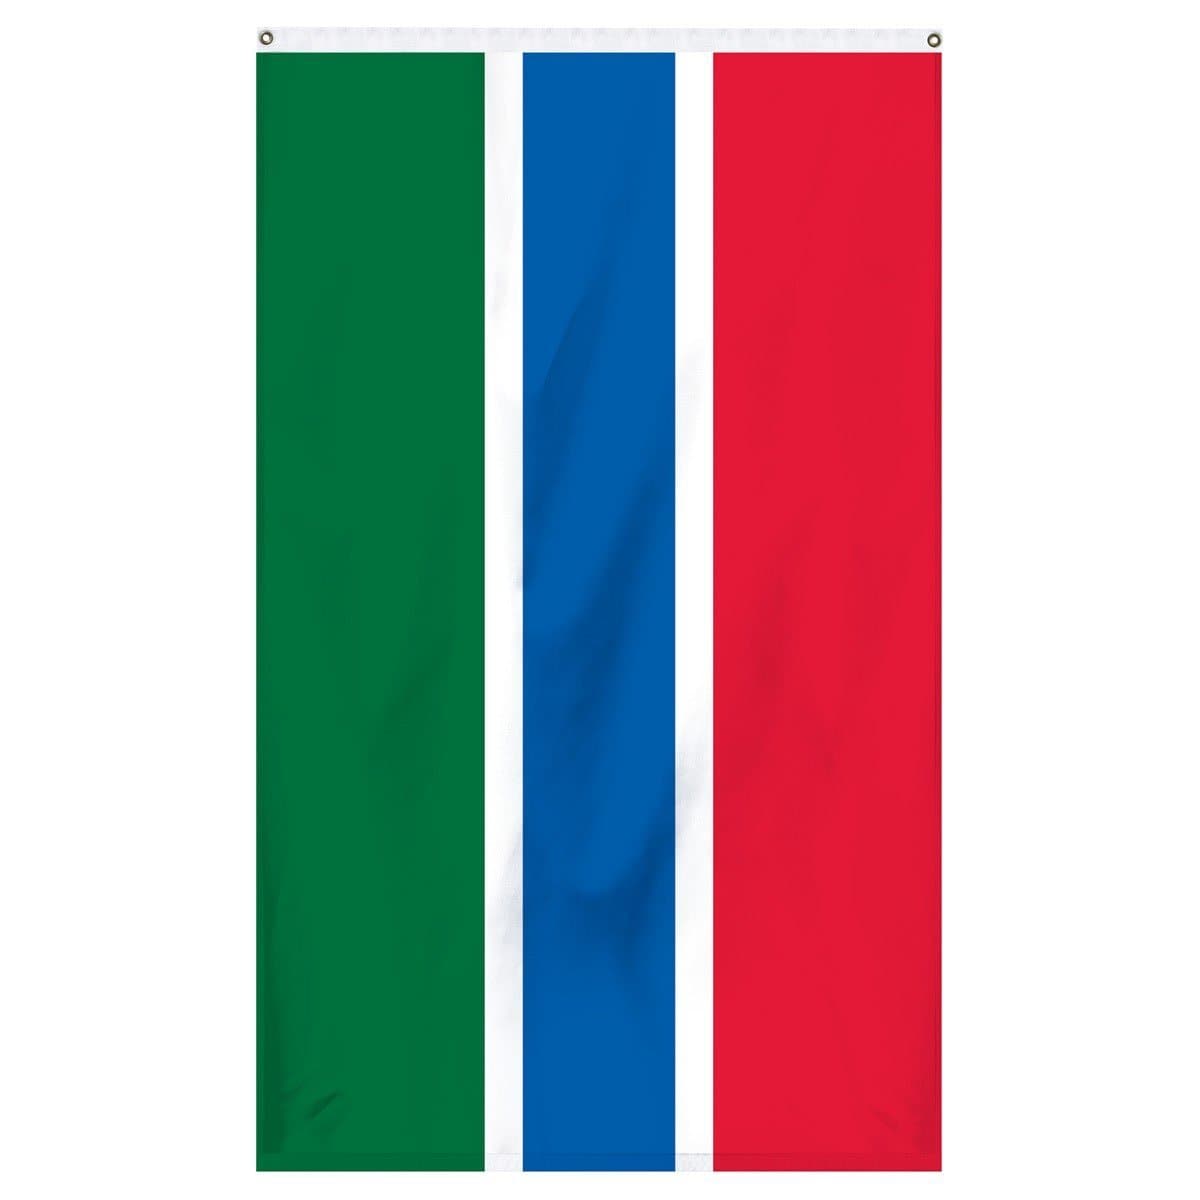 UN approved design of the official flag of Gambia for sale to buy online